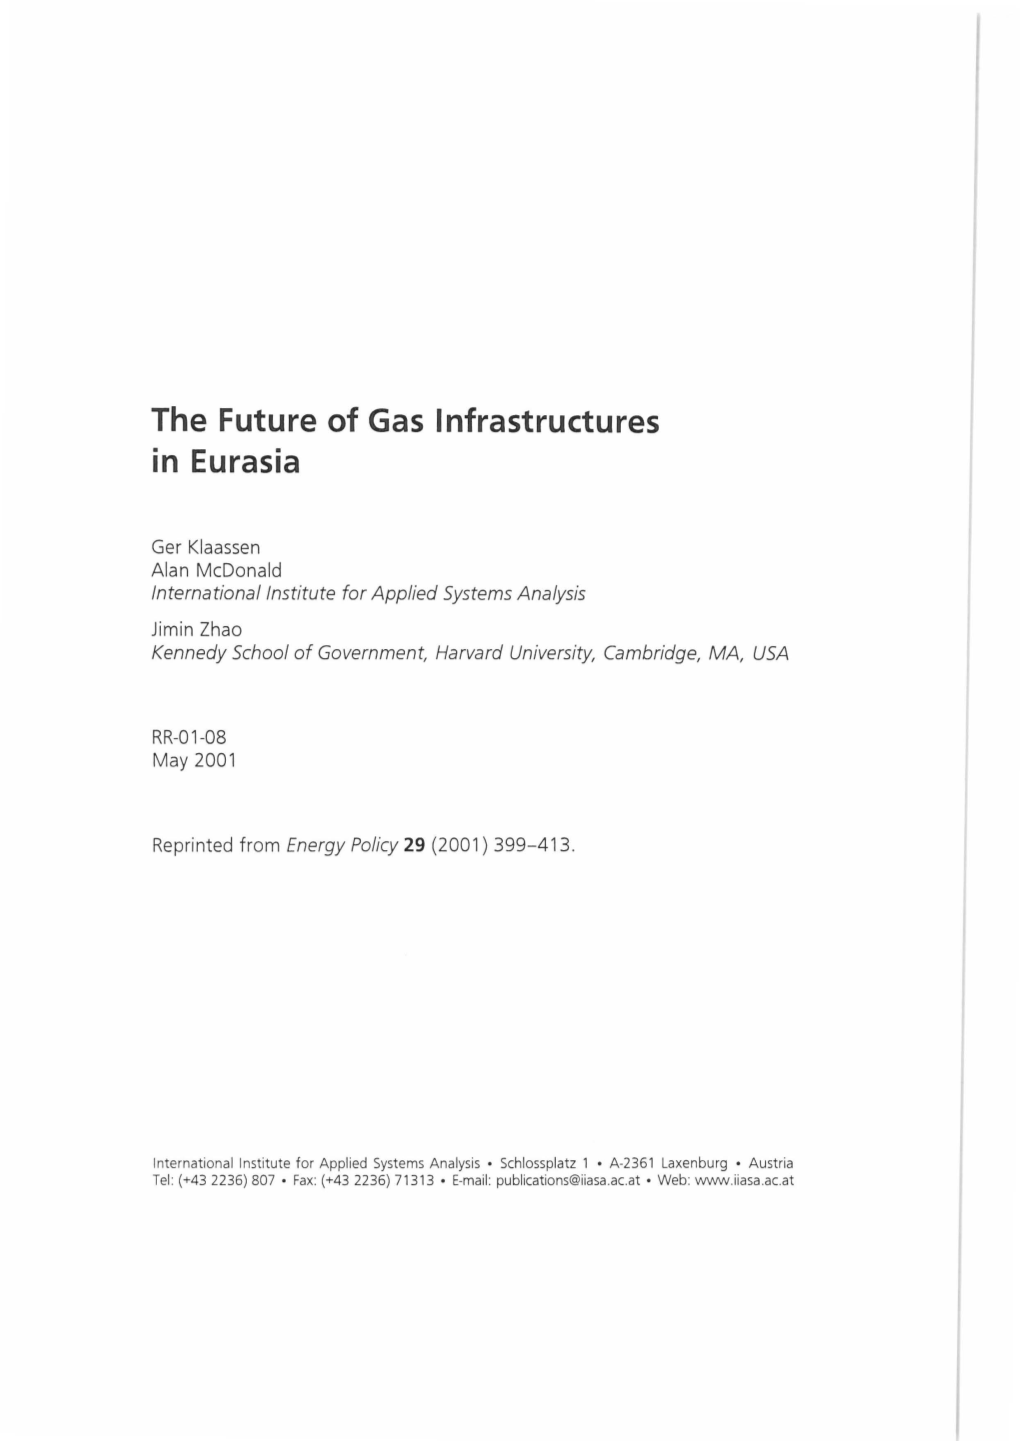 The Future of Gas Infrastructures in Eurasia